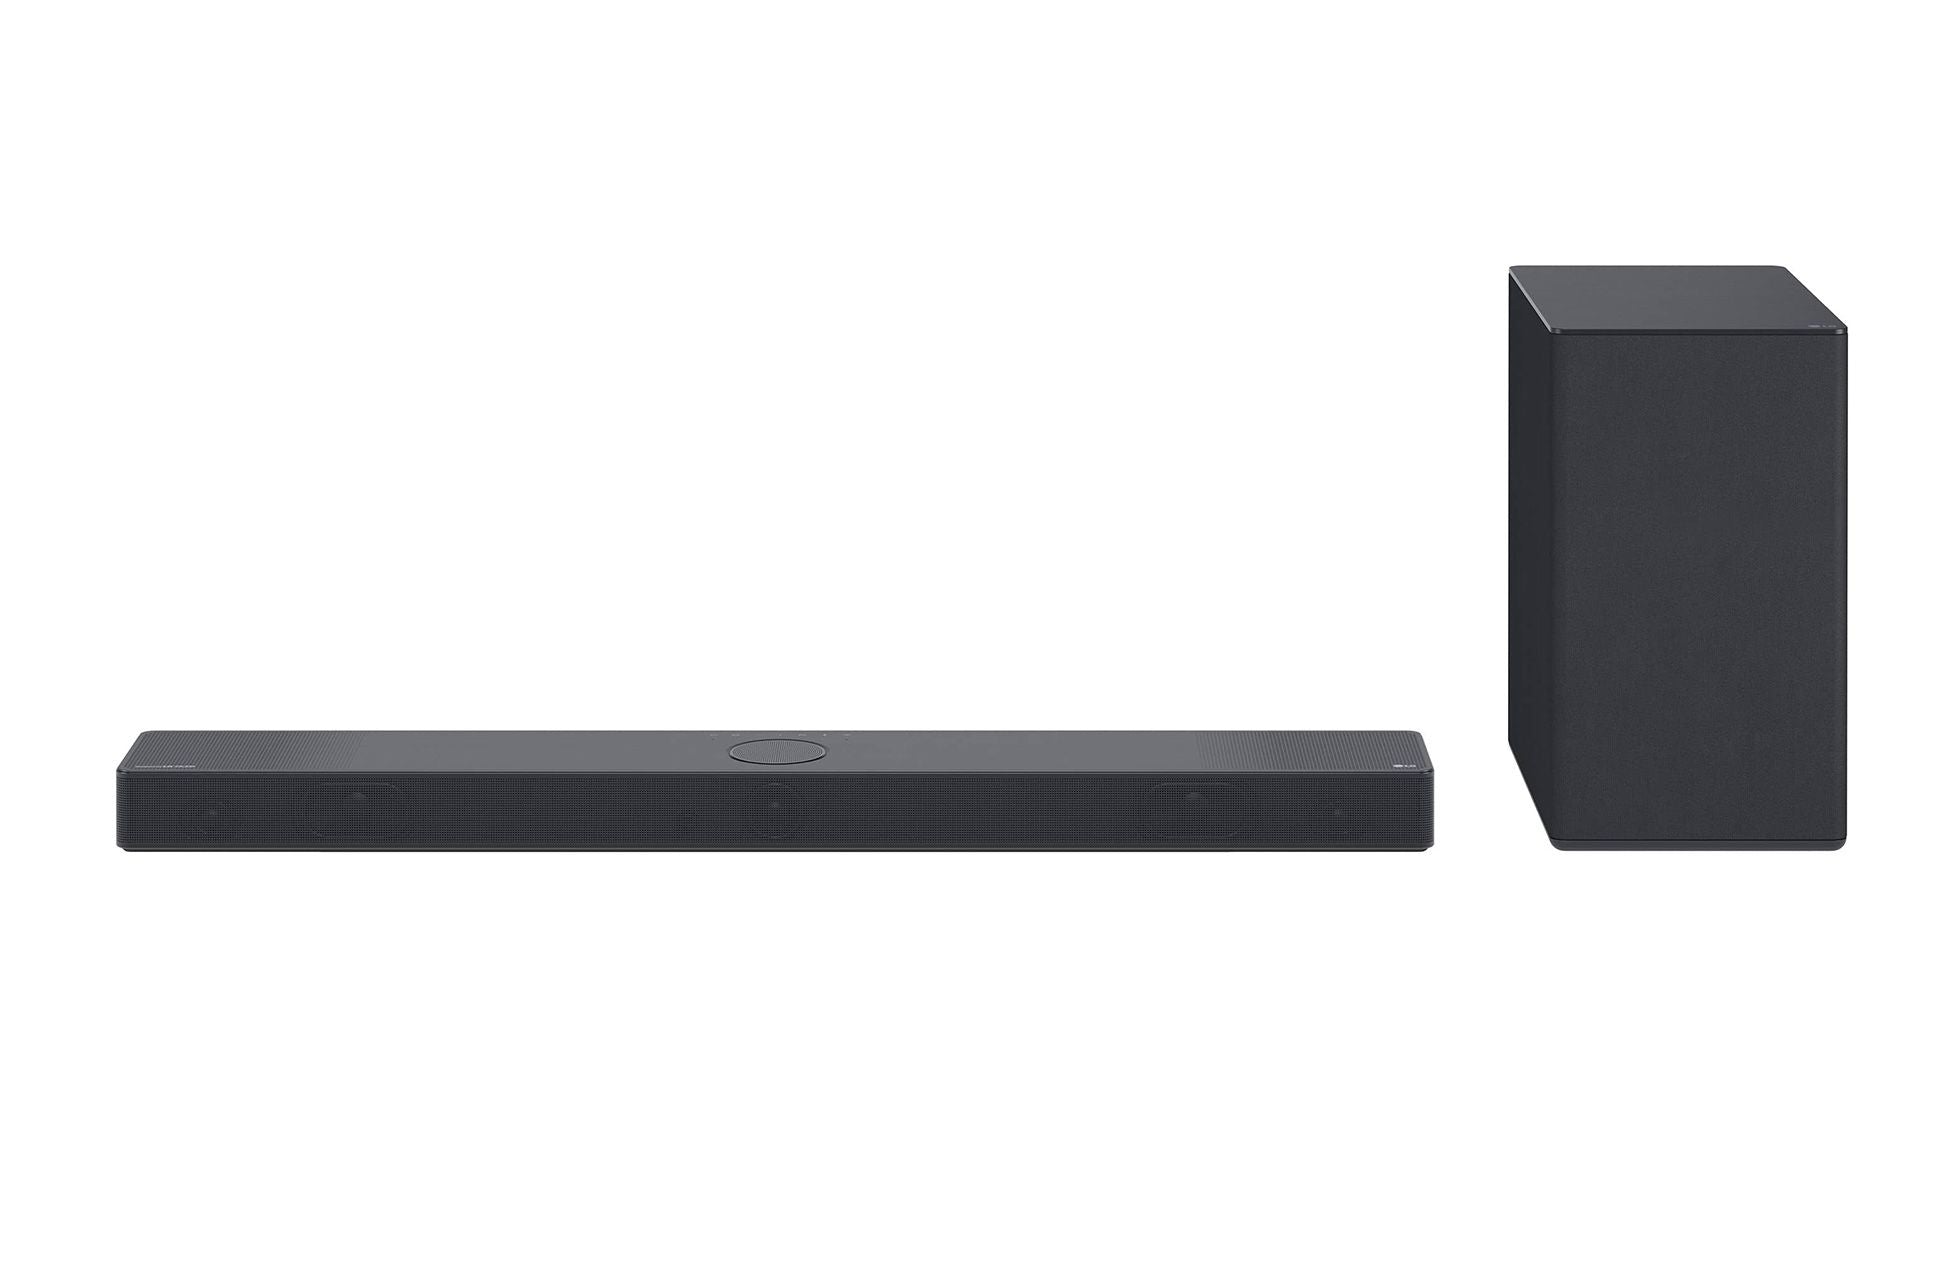 Image of LG USC9S 3.1.3 Wireless Soundbar and Subwoofer with Dolby Atmos Black